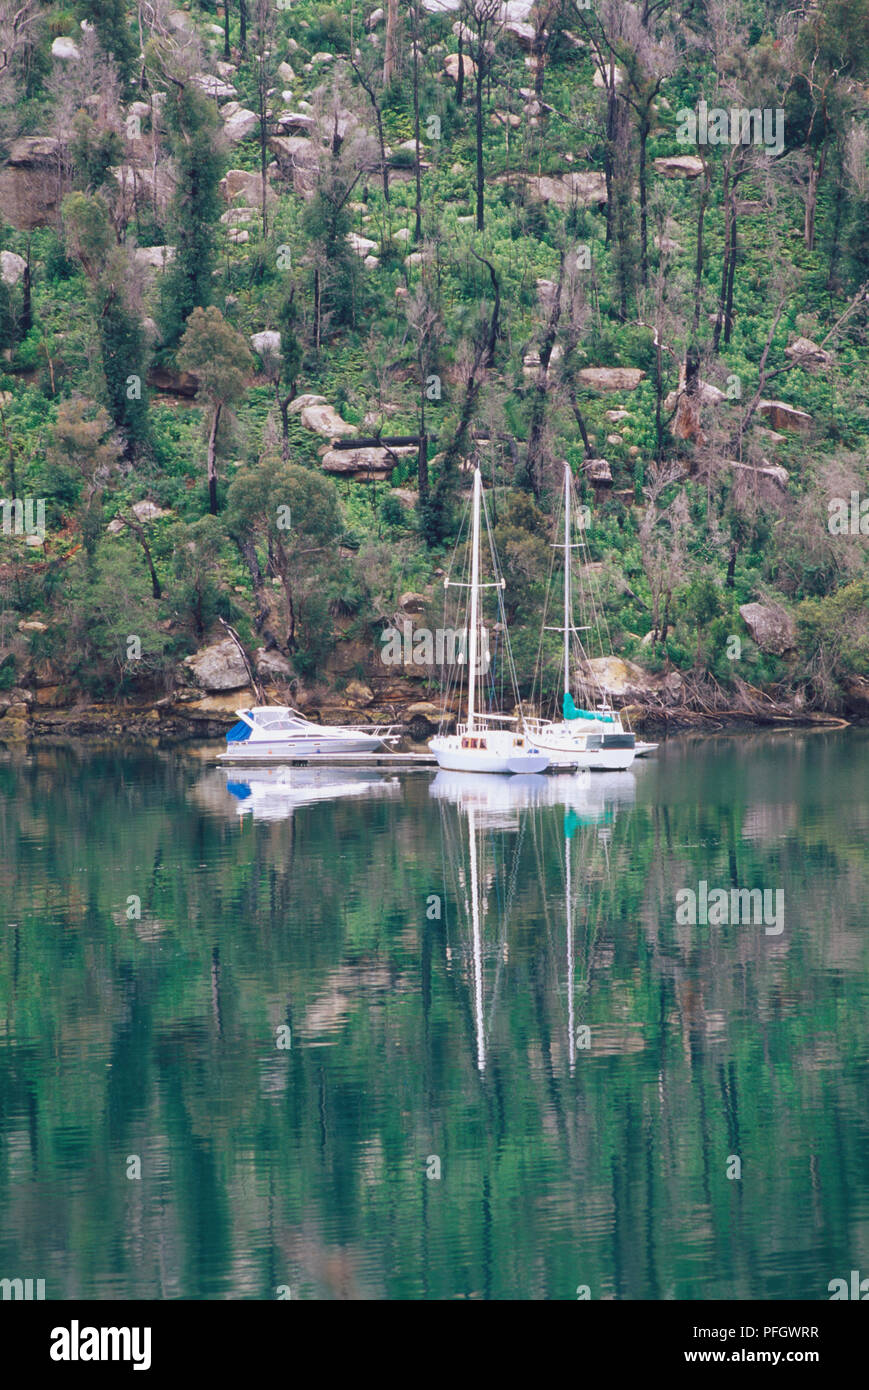 Australia, New South Wales Sydney, Yachts in Coal and Candle Creek, the bush in the background has regrowth after a bushfire. Stock Photo